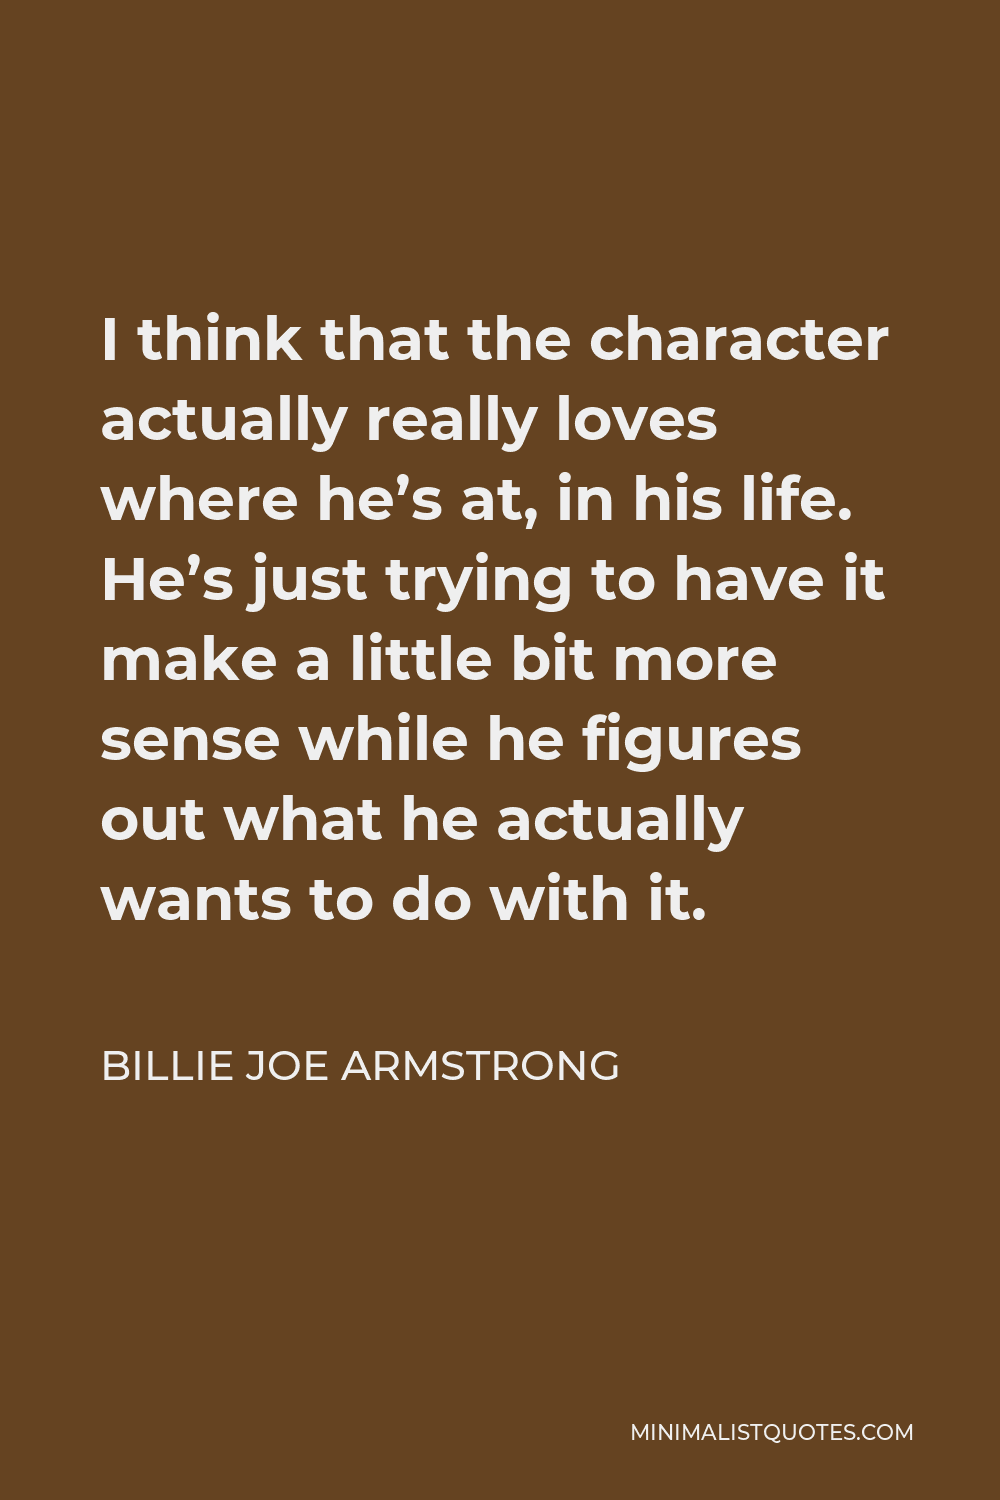 Billie Joe Armstrong Quote - I think that the character actually really loves where he’s at, in his life. He’s just trying to have it make a little bit more sense while he figures out what he actually wants to do with it.